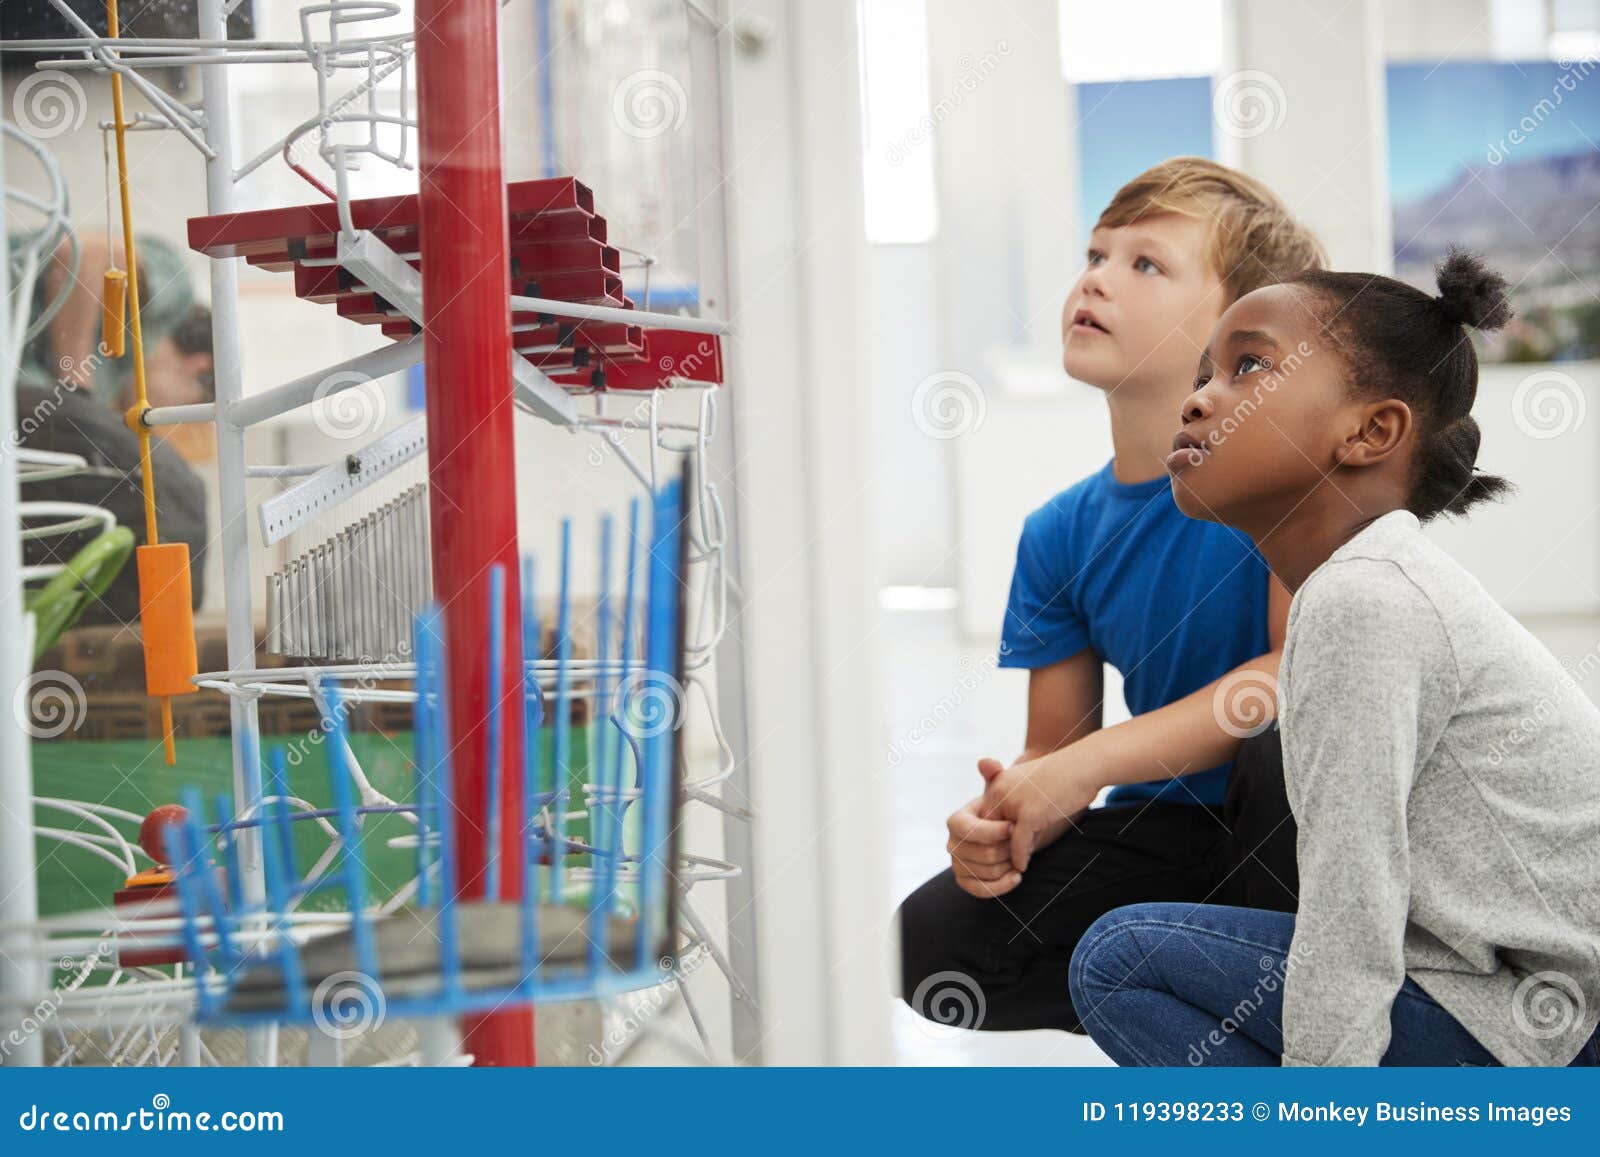 two kids kneeling and looking at a science exhibit